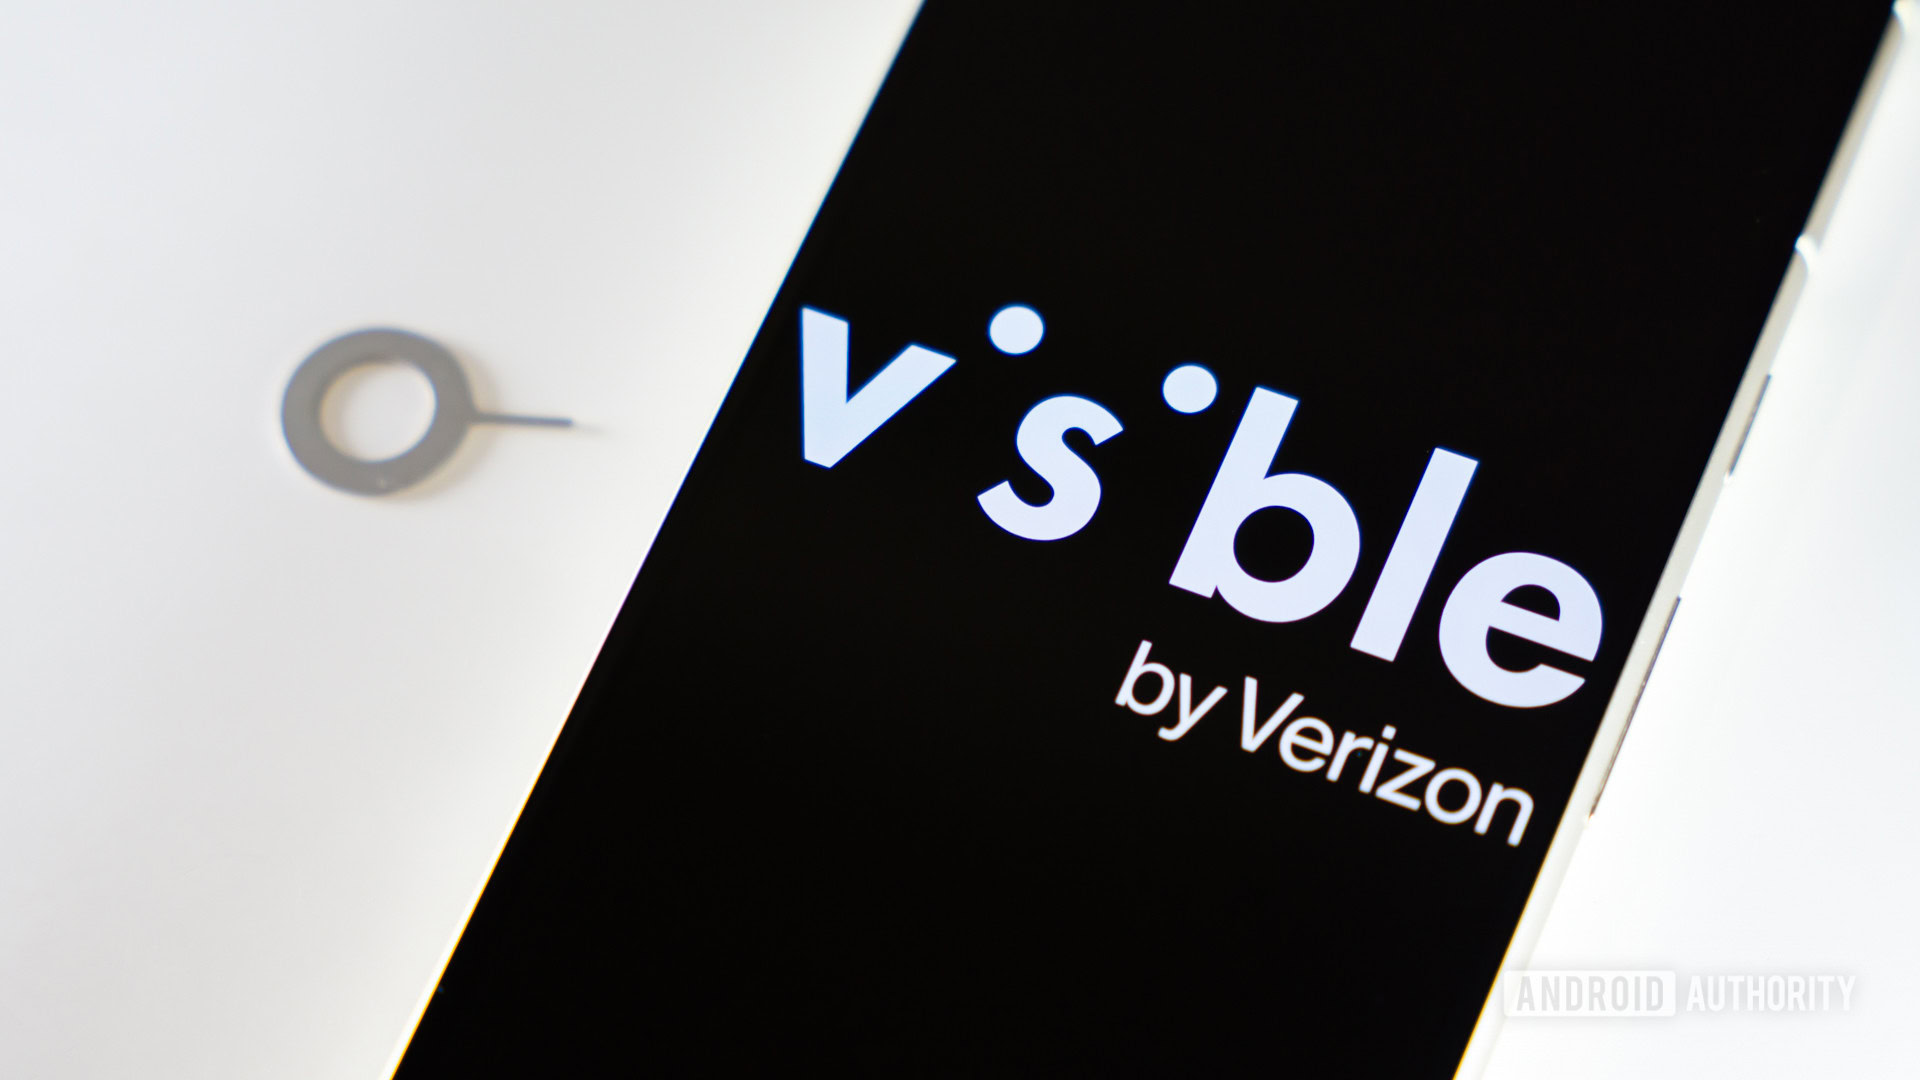 Visible by Verizon logo on smartphone next to SIM ejector tool